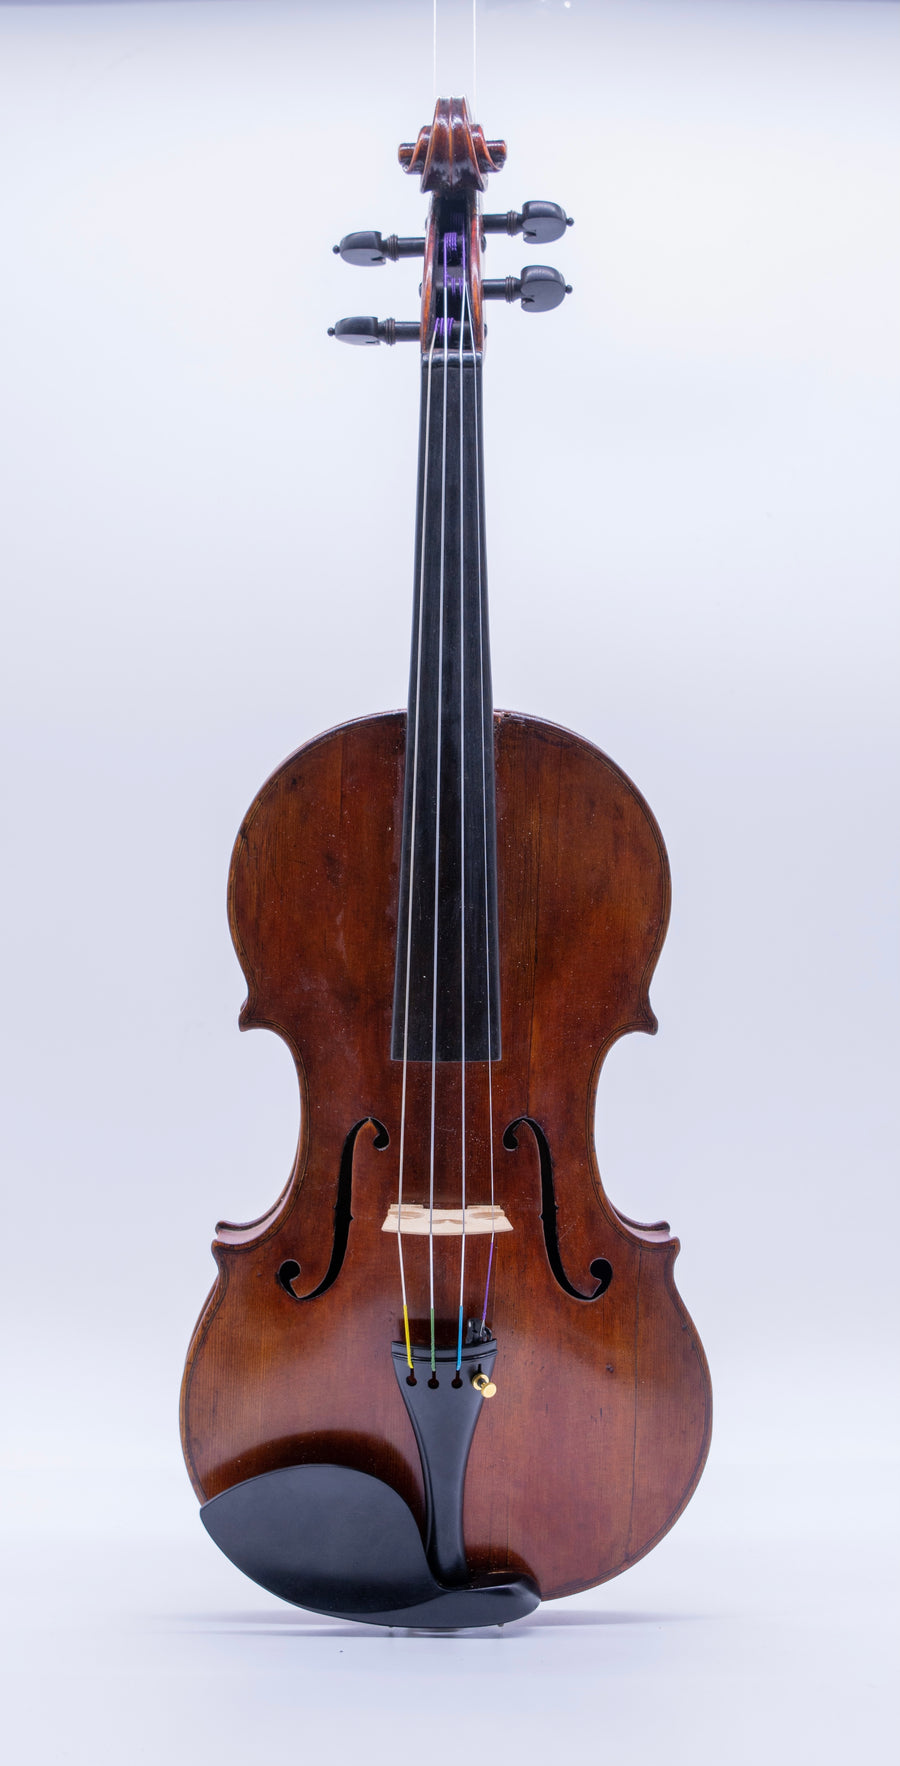 A Canadian Violin from 1901 By J.W. Hinchcliffe.